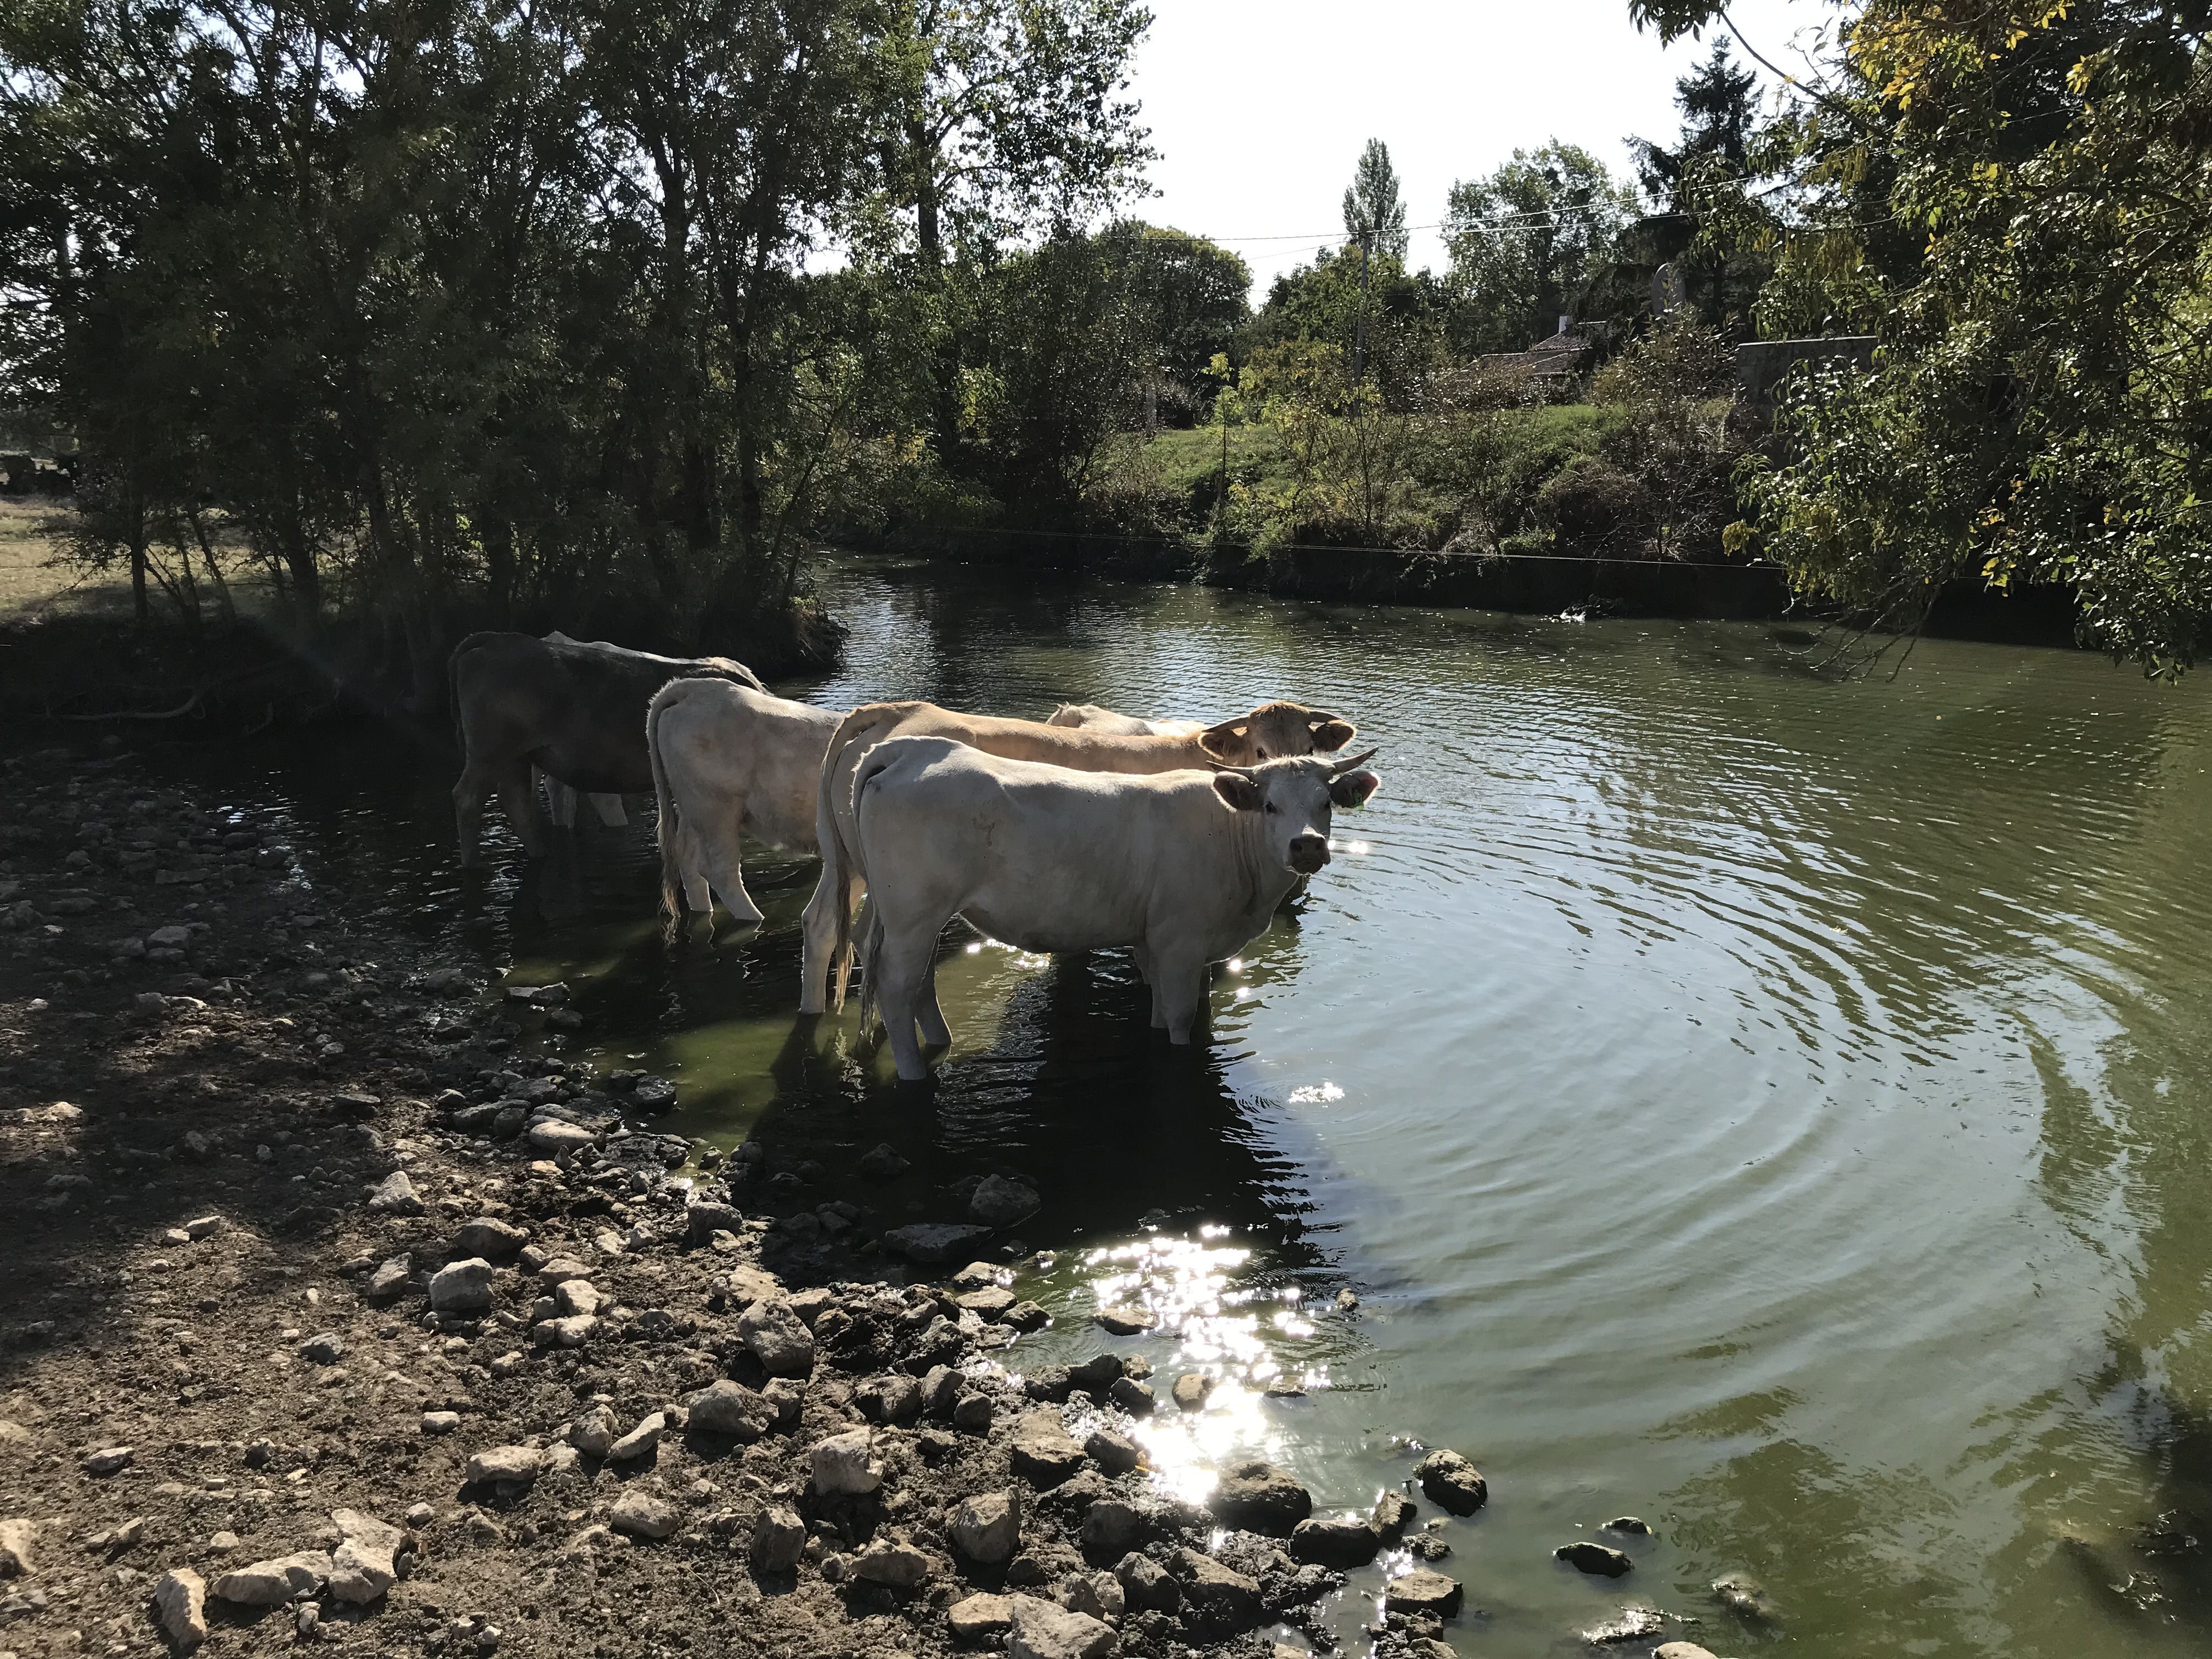 Cows drinking water in the park